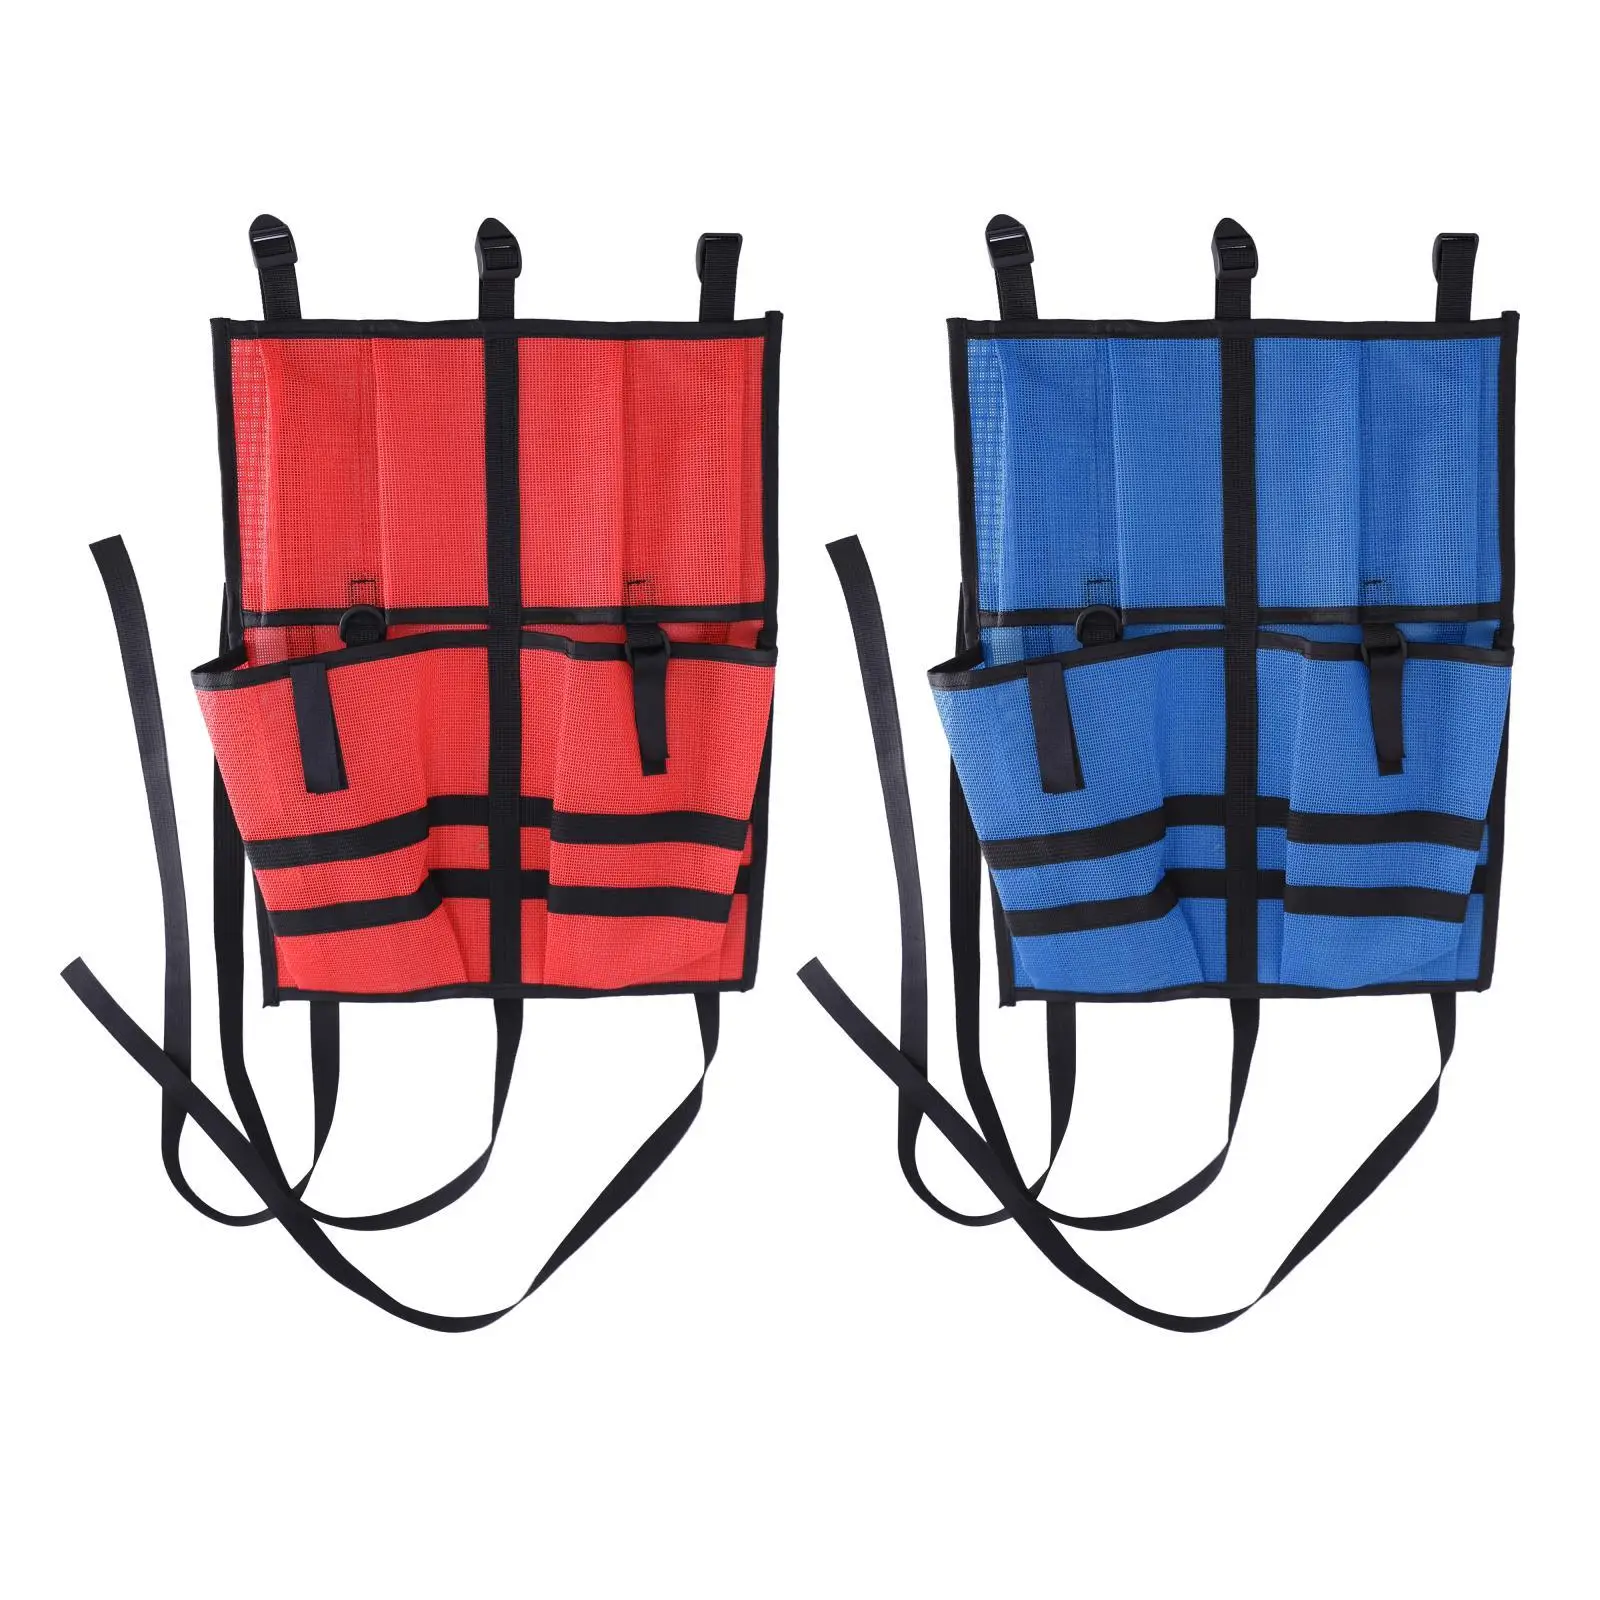 Durable Nylon Kayak Storage Mesh Bag Side Pouch Organizer Accessory Gear Holder Storage for Vehicle and Much More Fishing Canoe